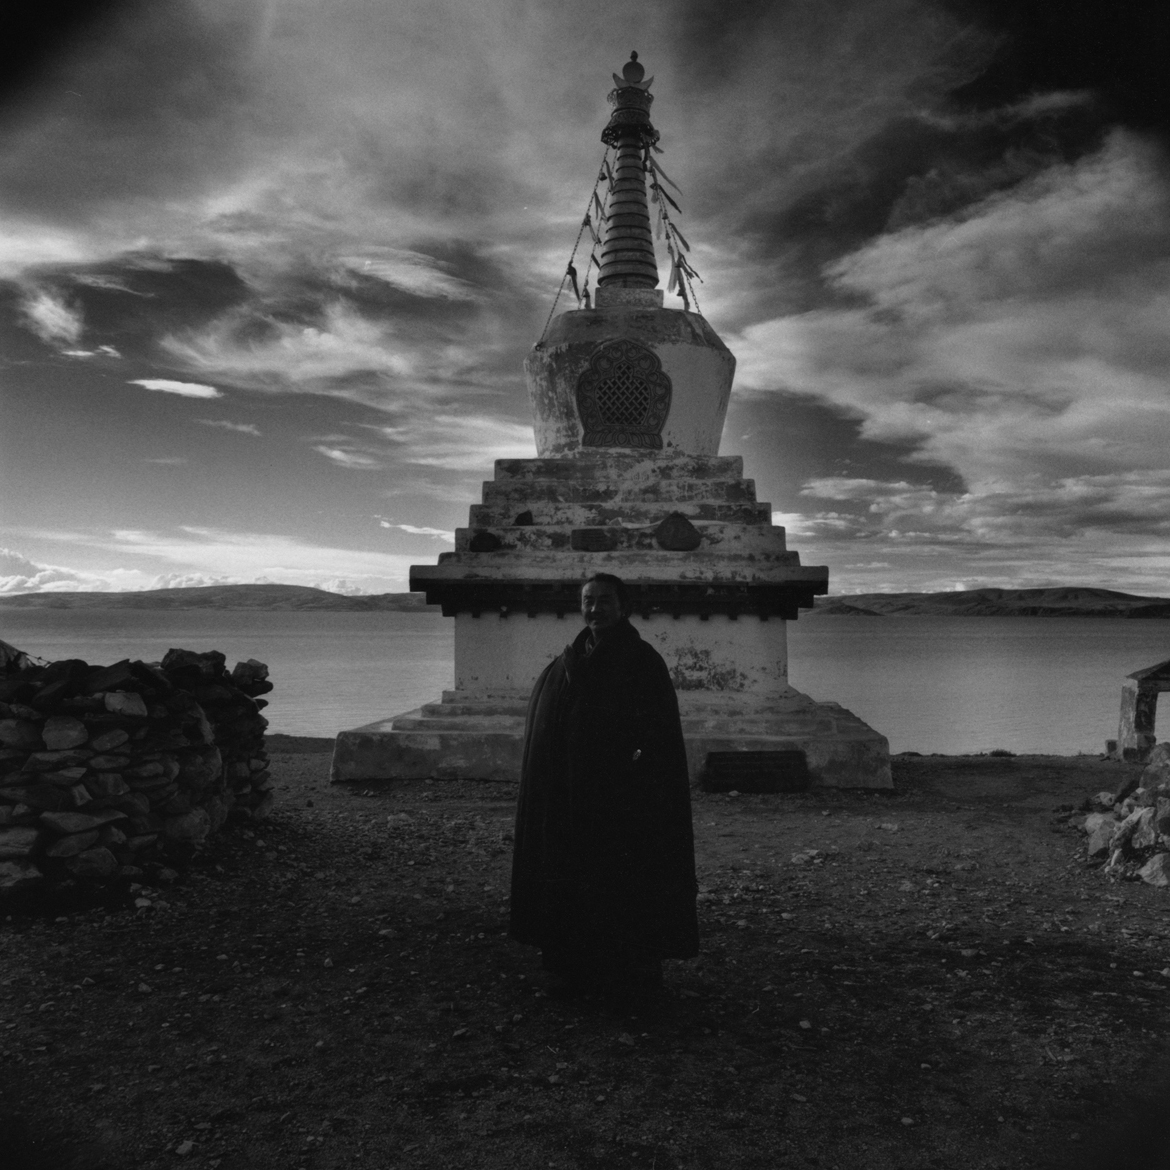 Some souls never see light, yet in their darkness their spirits are illuminated. Drepung Monsatery, Lhasa, Tibet